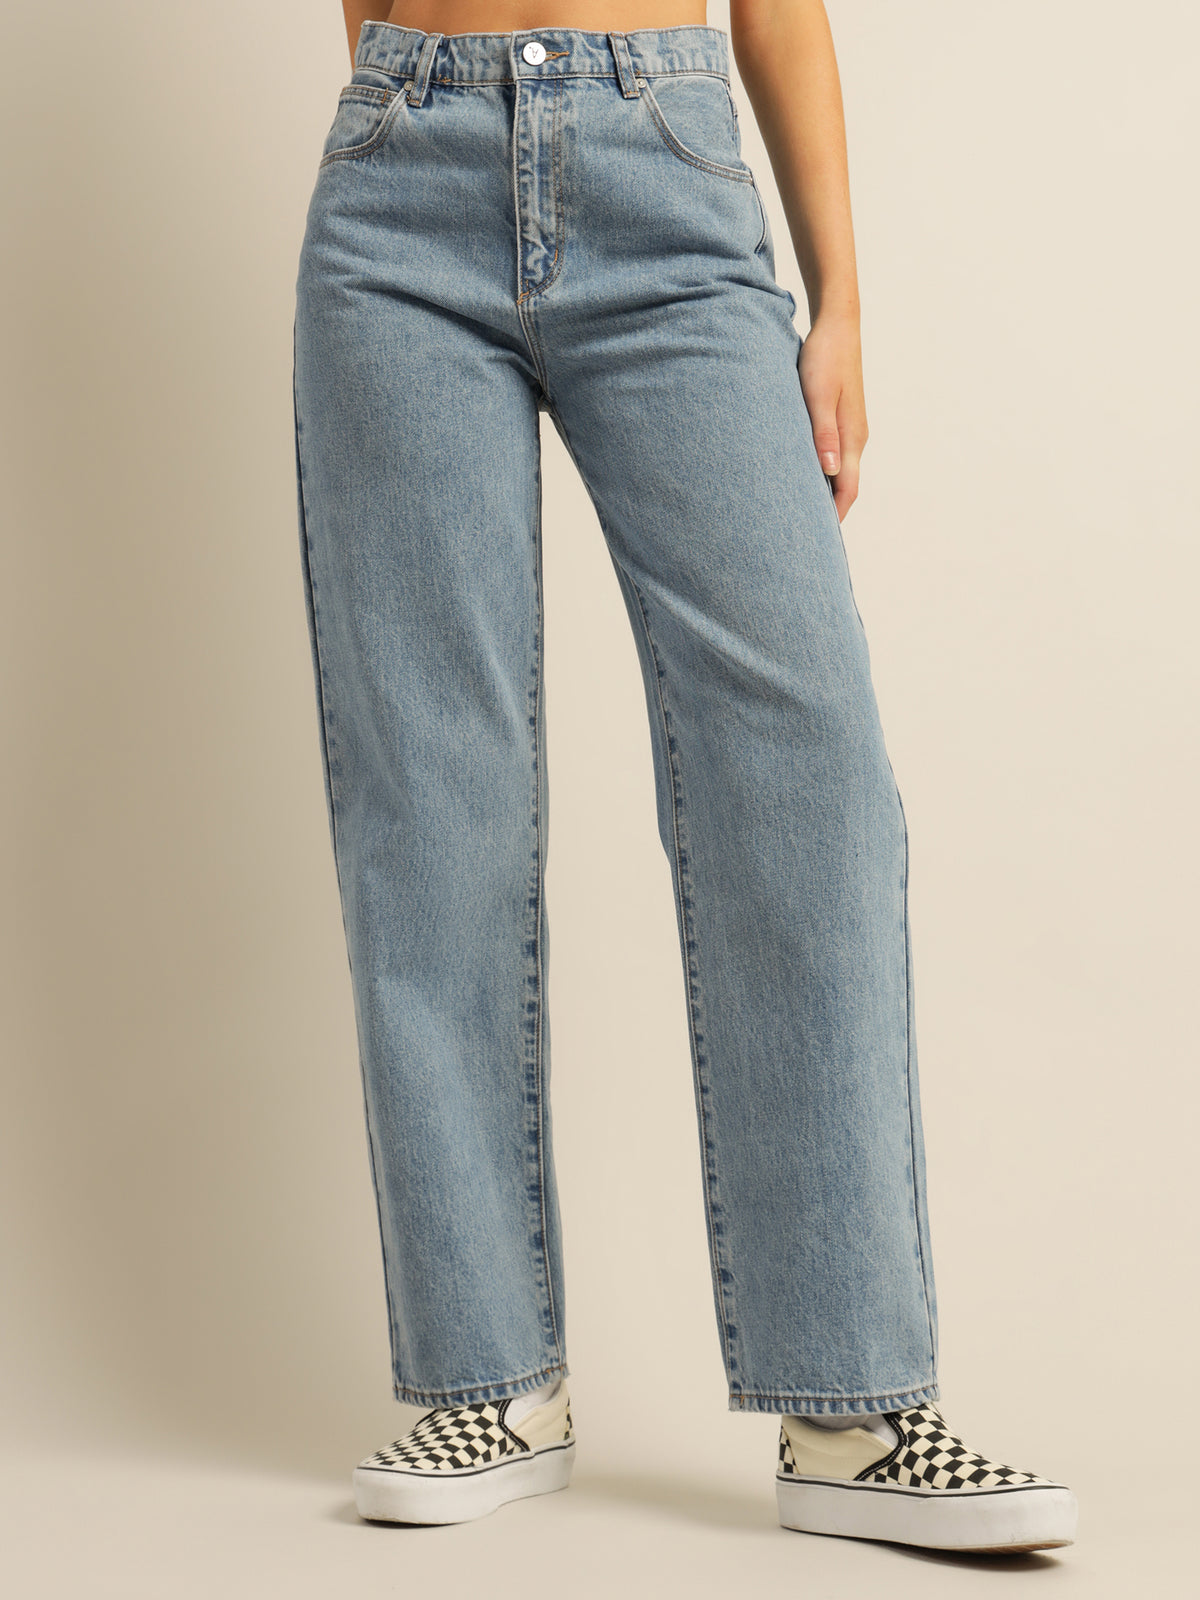 A Slouch Jeans in Georgia Blue